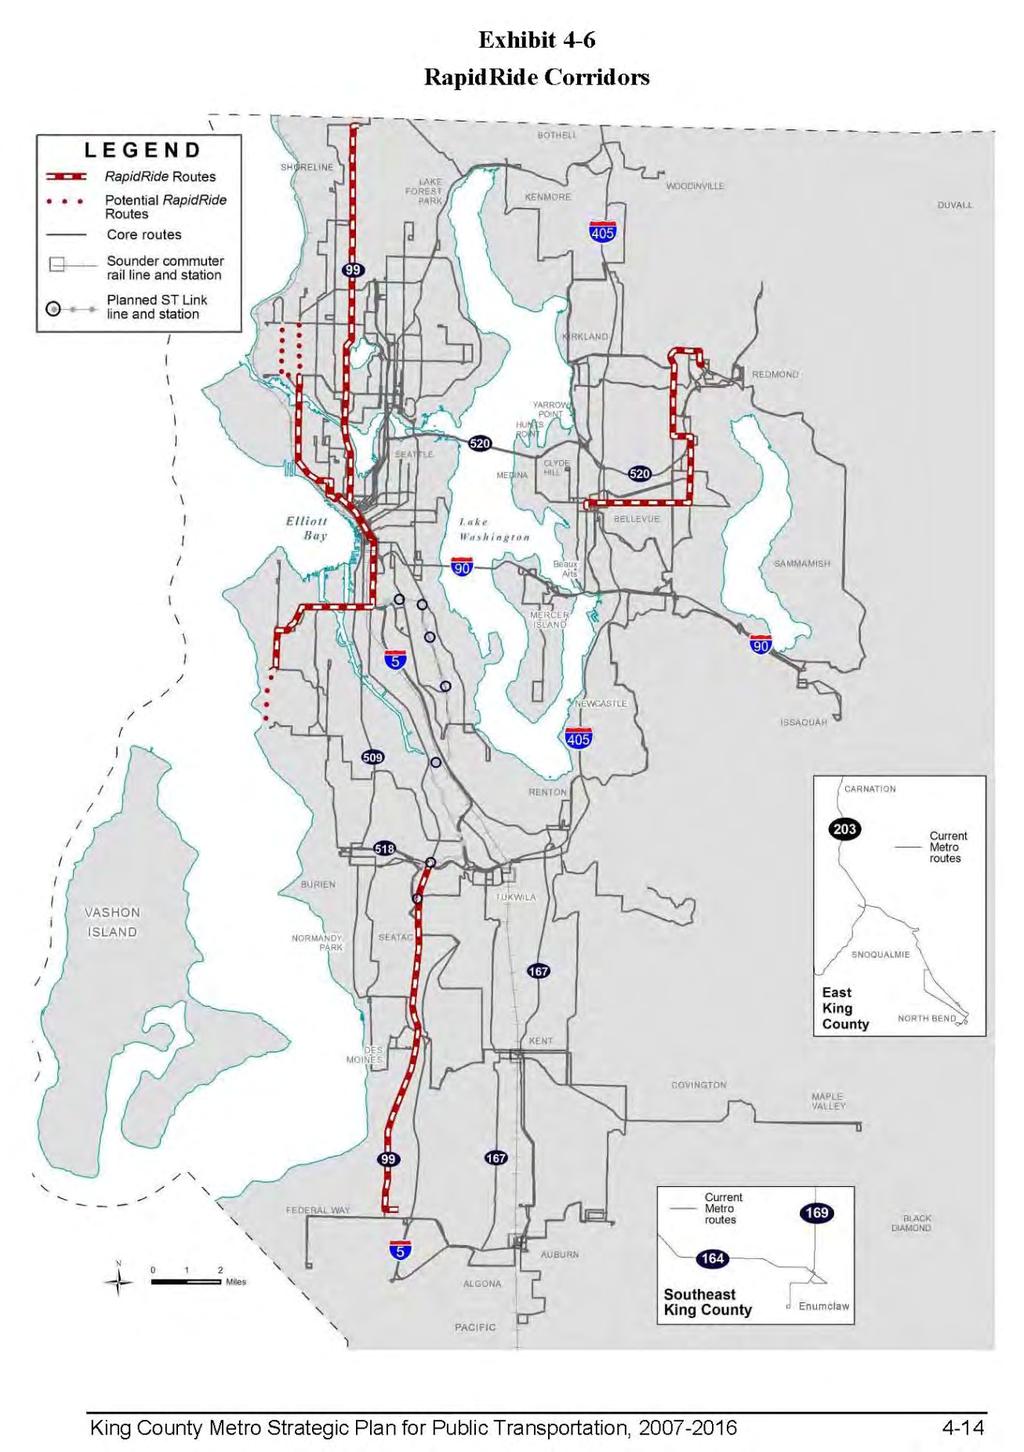 Review of Plans Pertinent to the Federal Way Transit Extension Source: King County Metro, 2007.